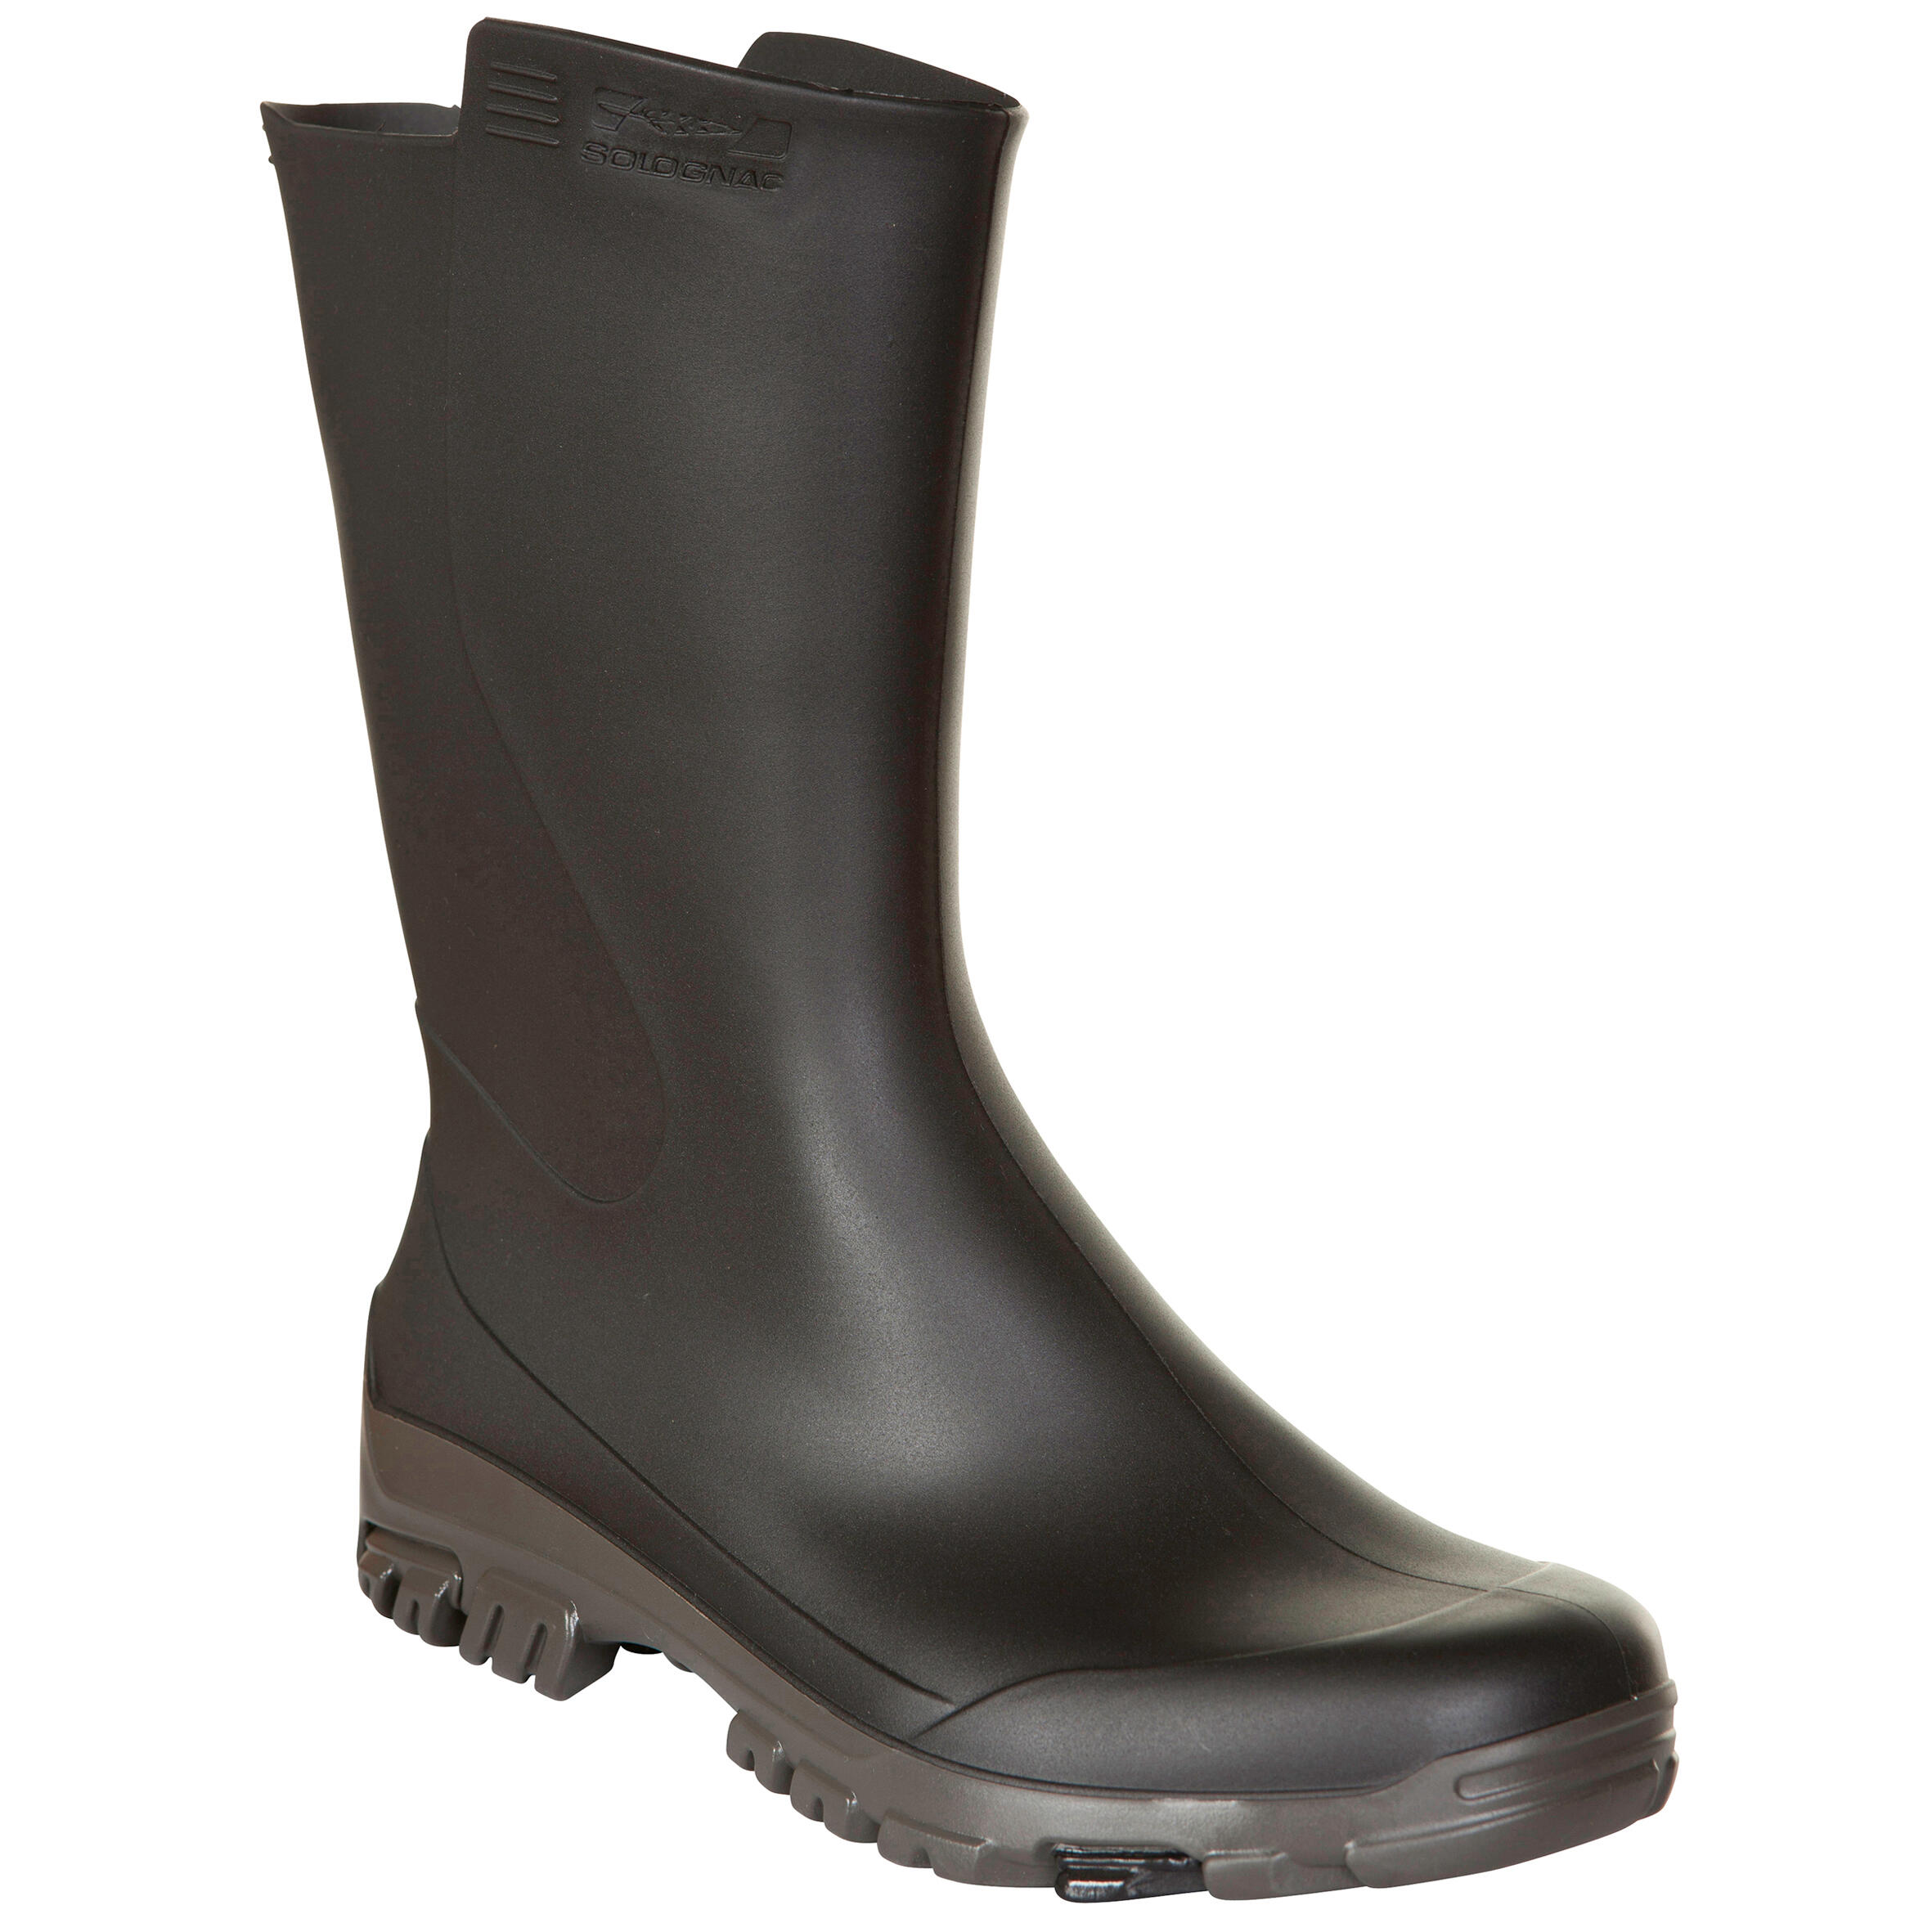 Buy women Gumboots for Monsoon at 